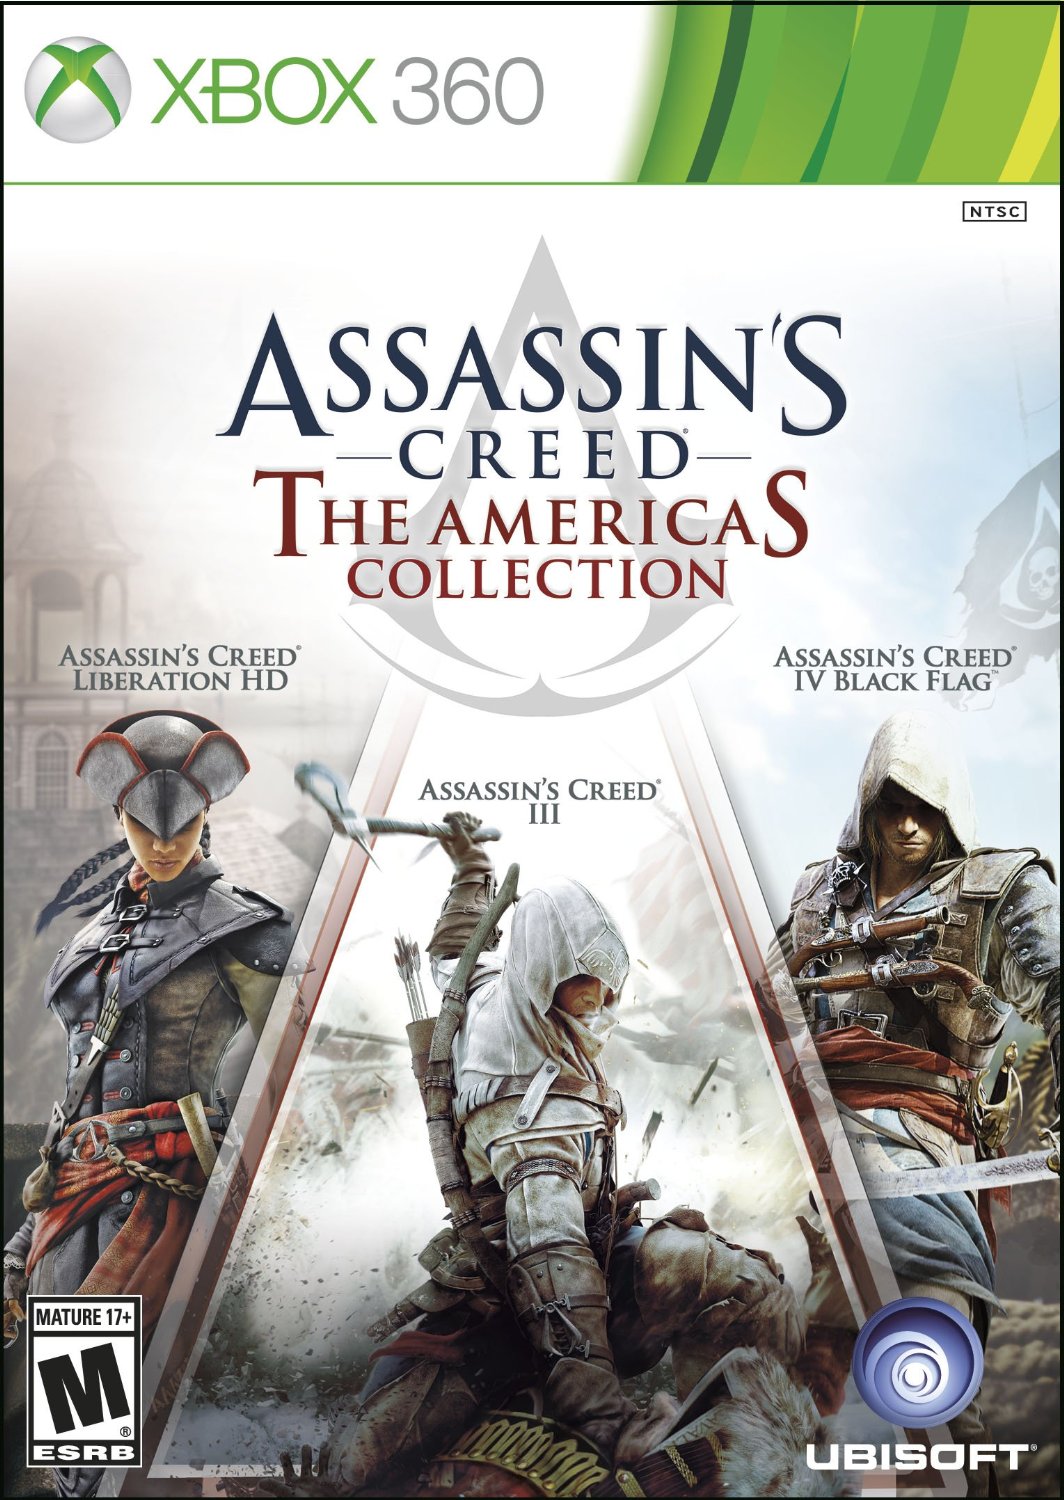 Assassin's Creed: The Americas Collection (Xbox 360)